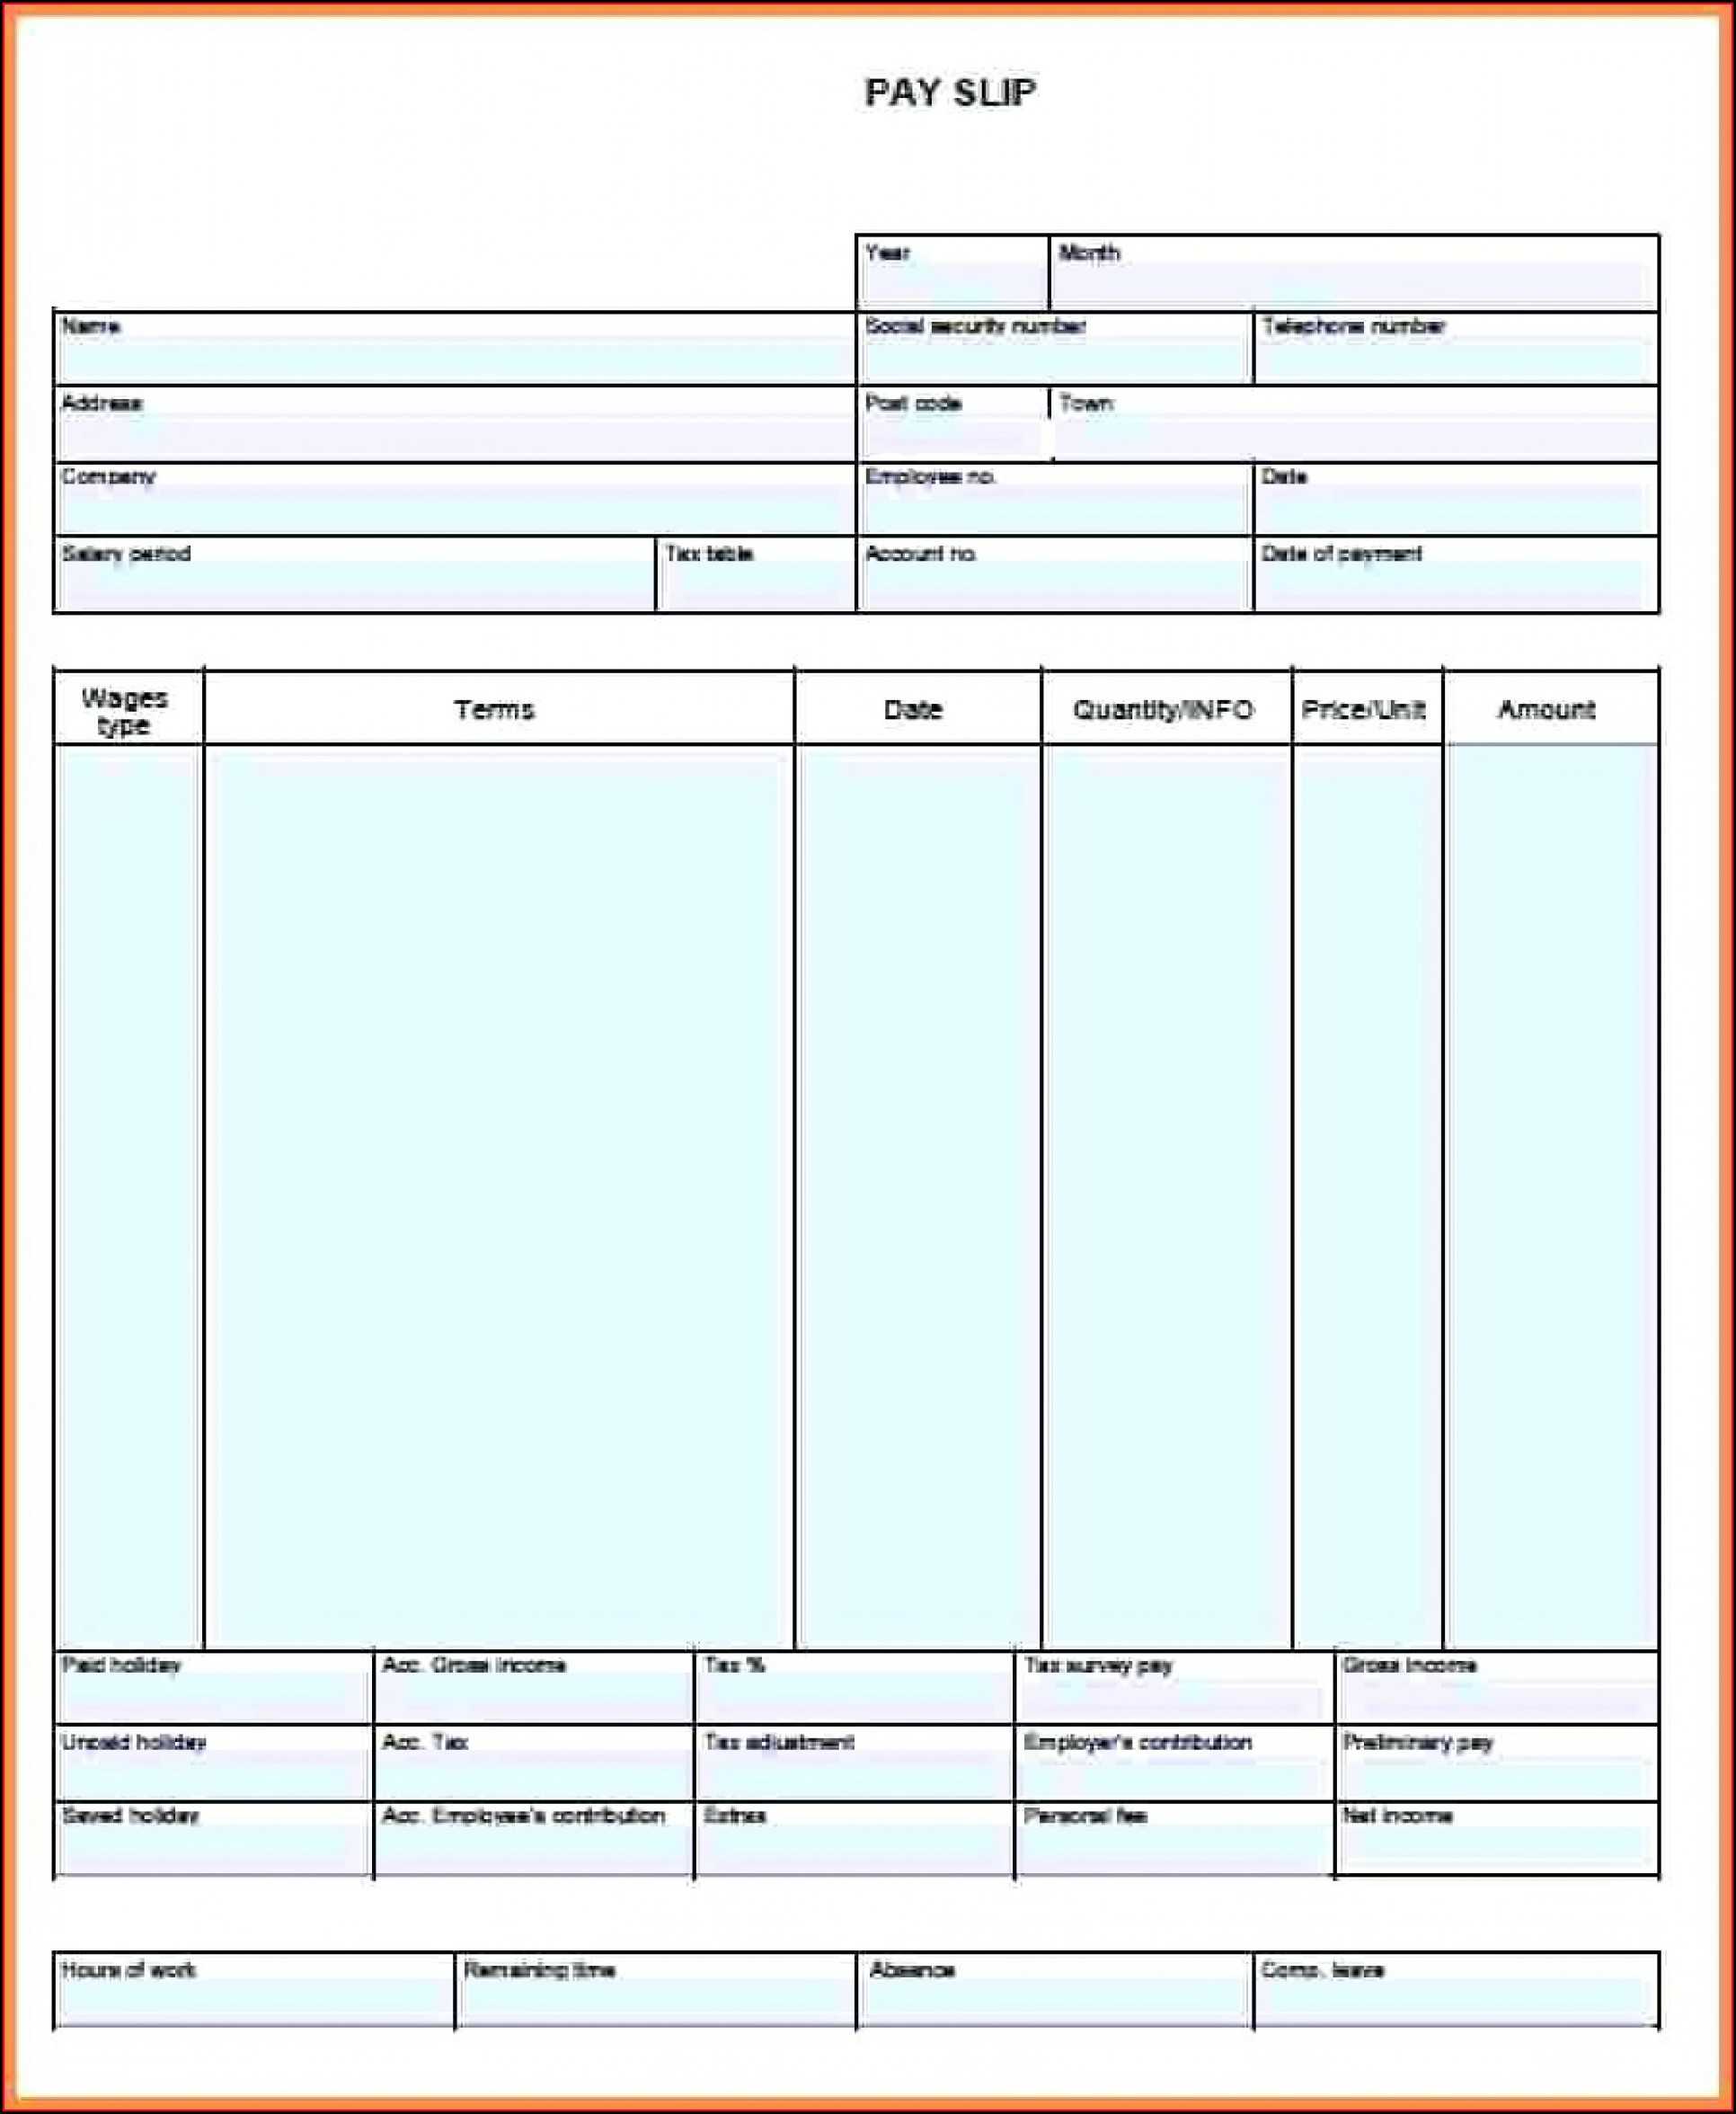 Adp Pay Stub Template Download – Template 1 : Resume With Blank Pay Stub Template Word